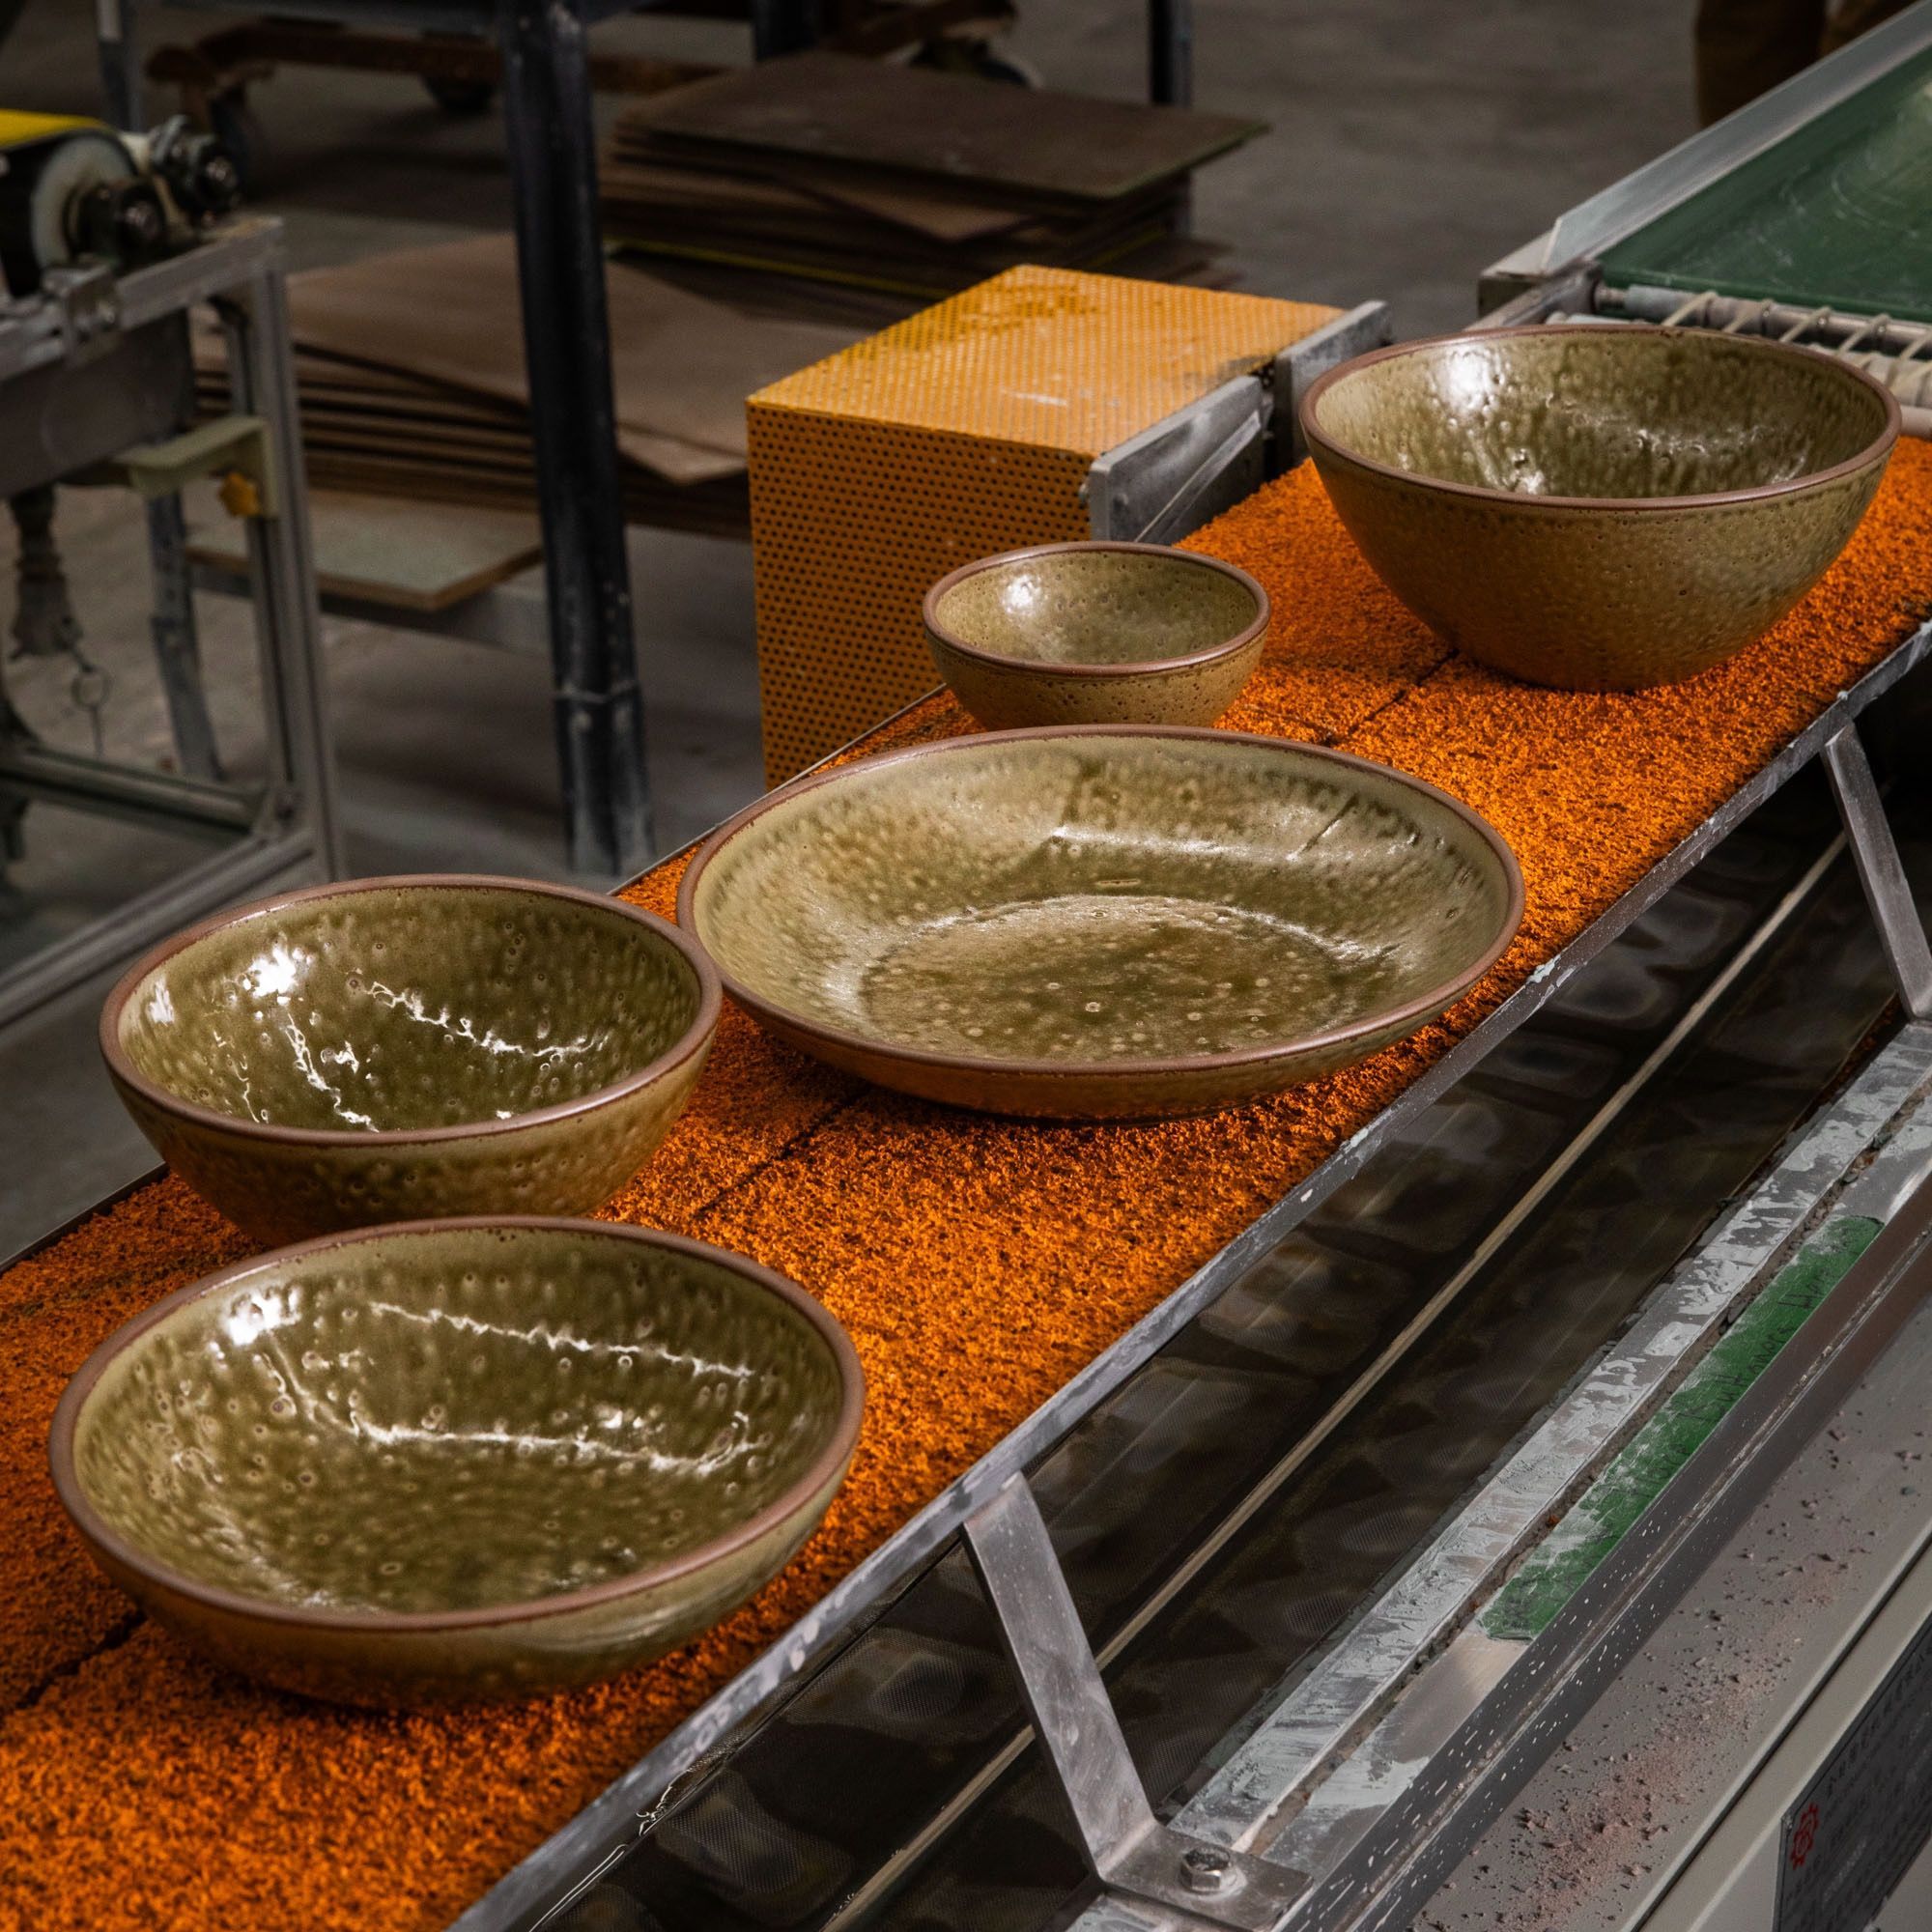 In a warehouse setting, five ceramic bowls of various sizes in a mossy earthy green color are on an orange assembly line.